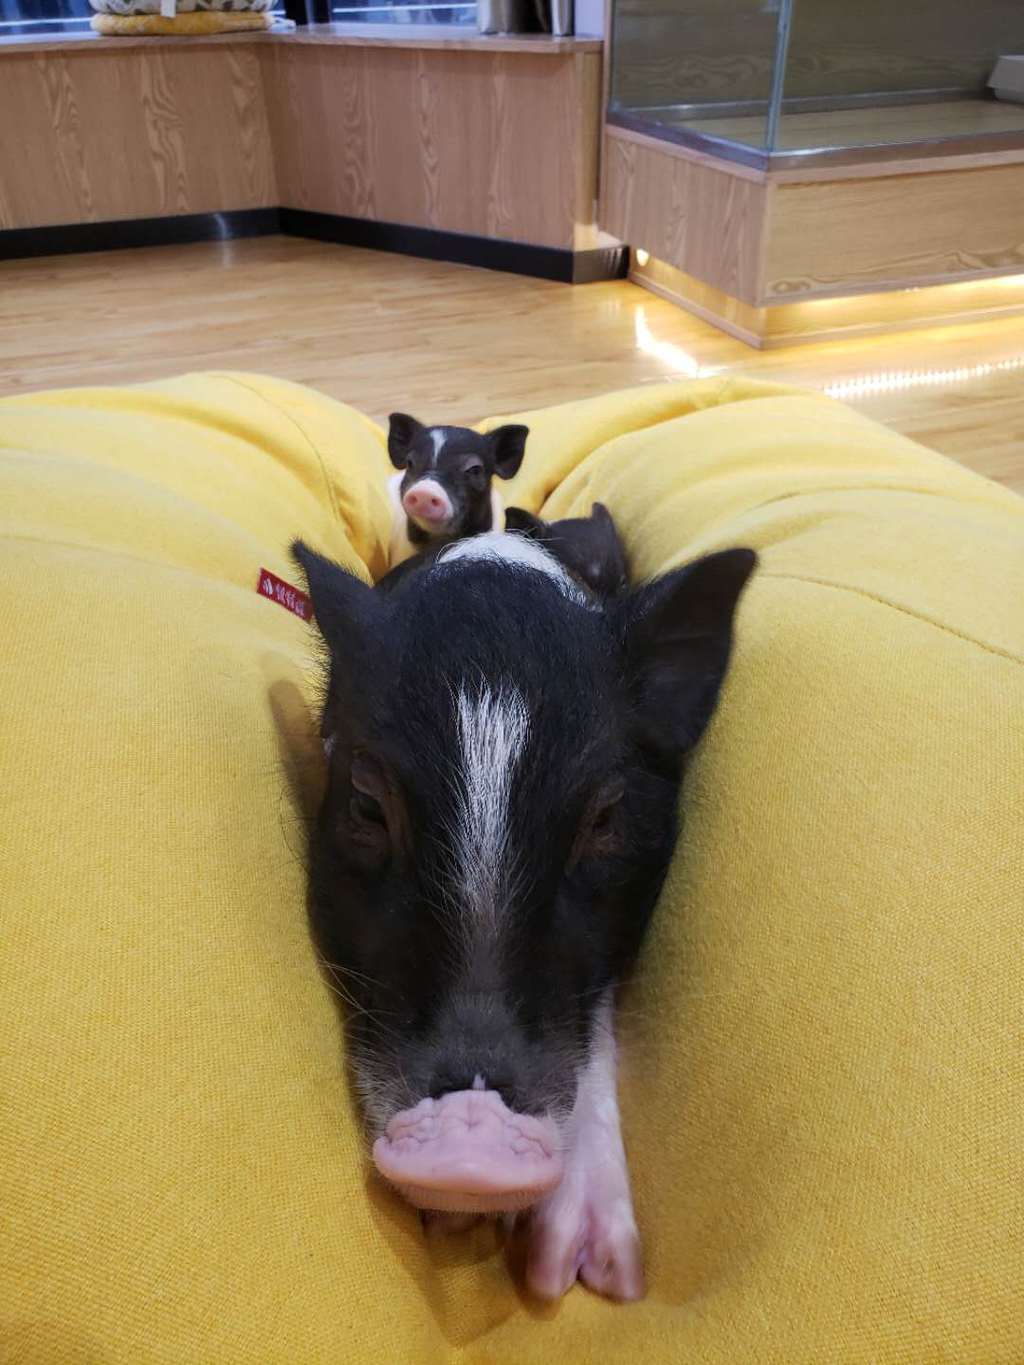 Featured image for “Cute Pig Cafe in Shenzhen”